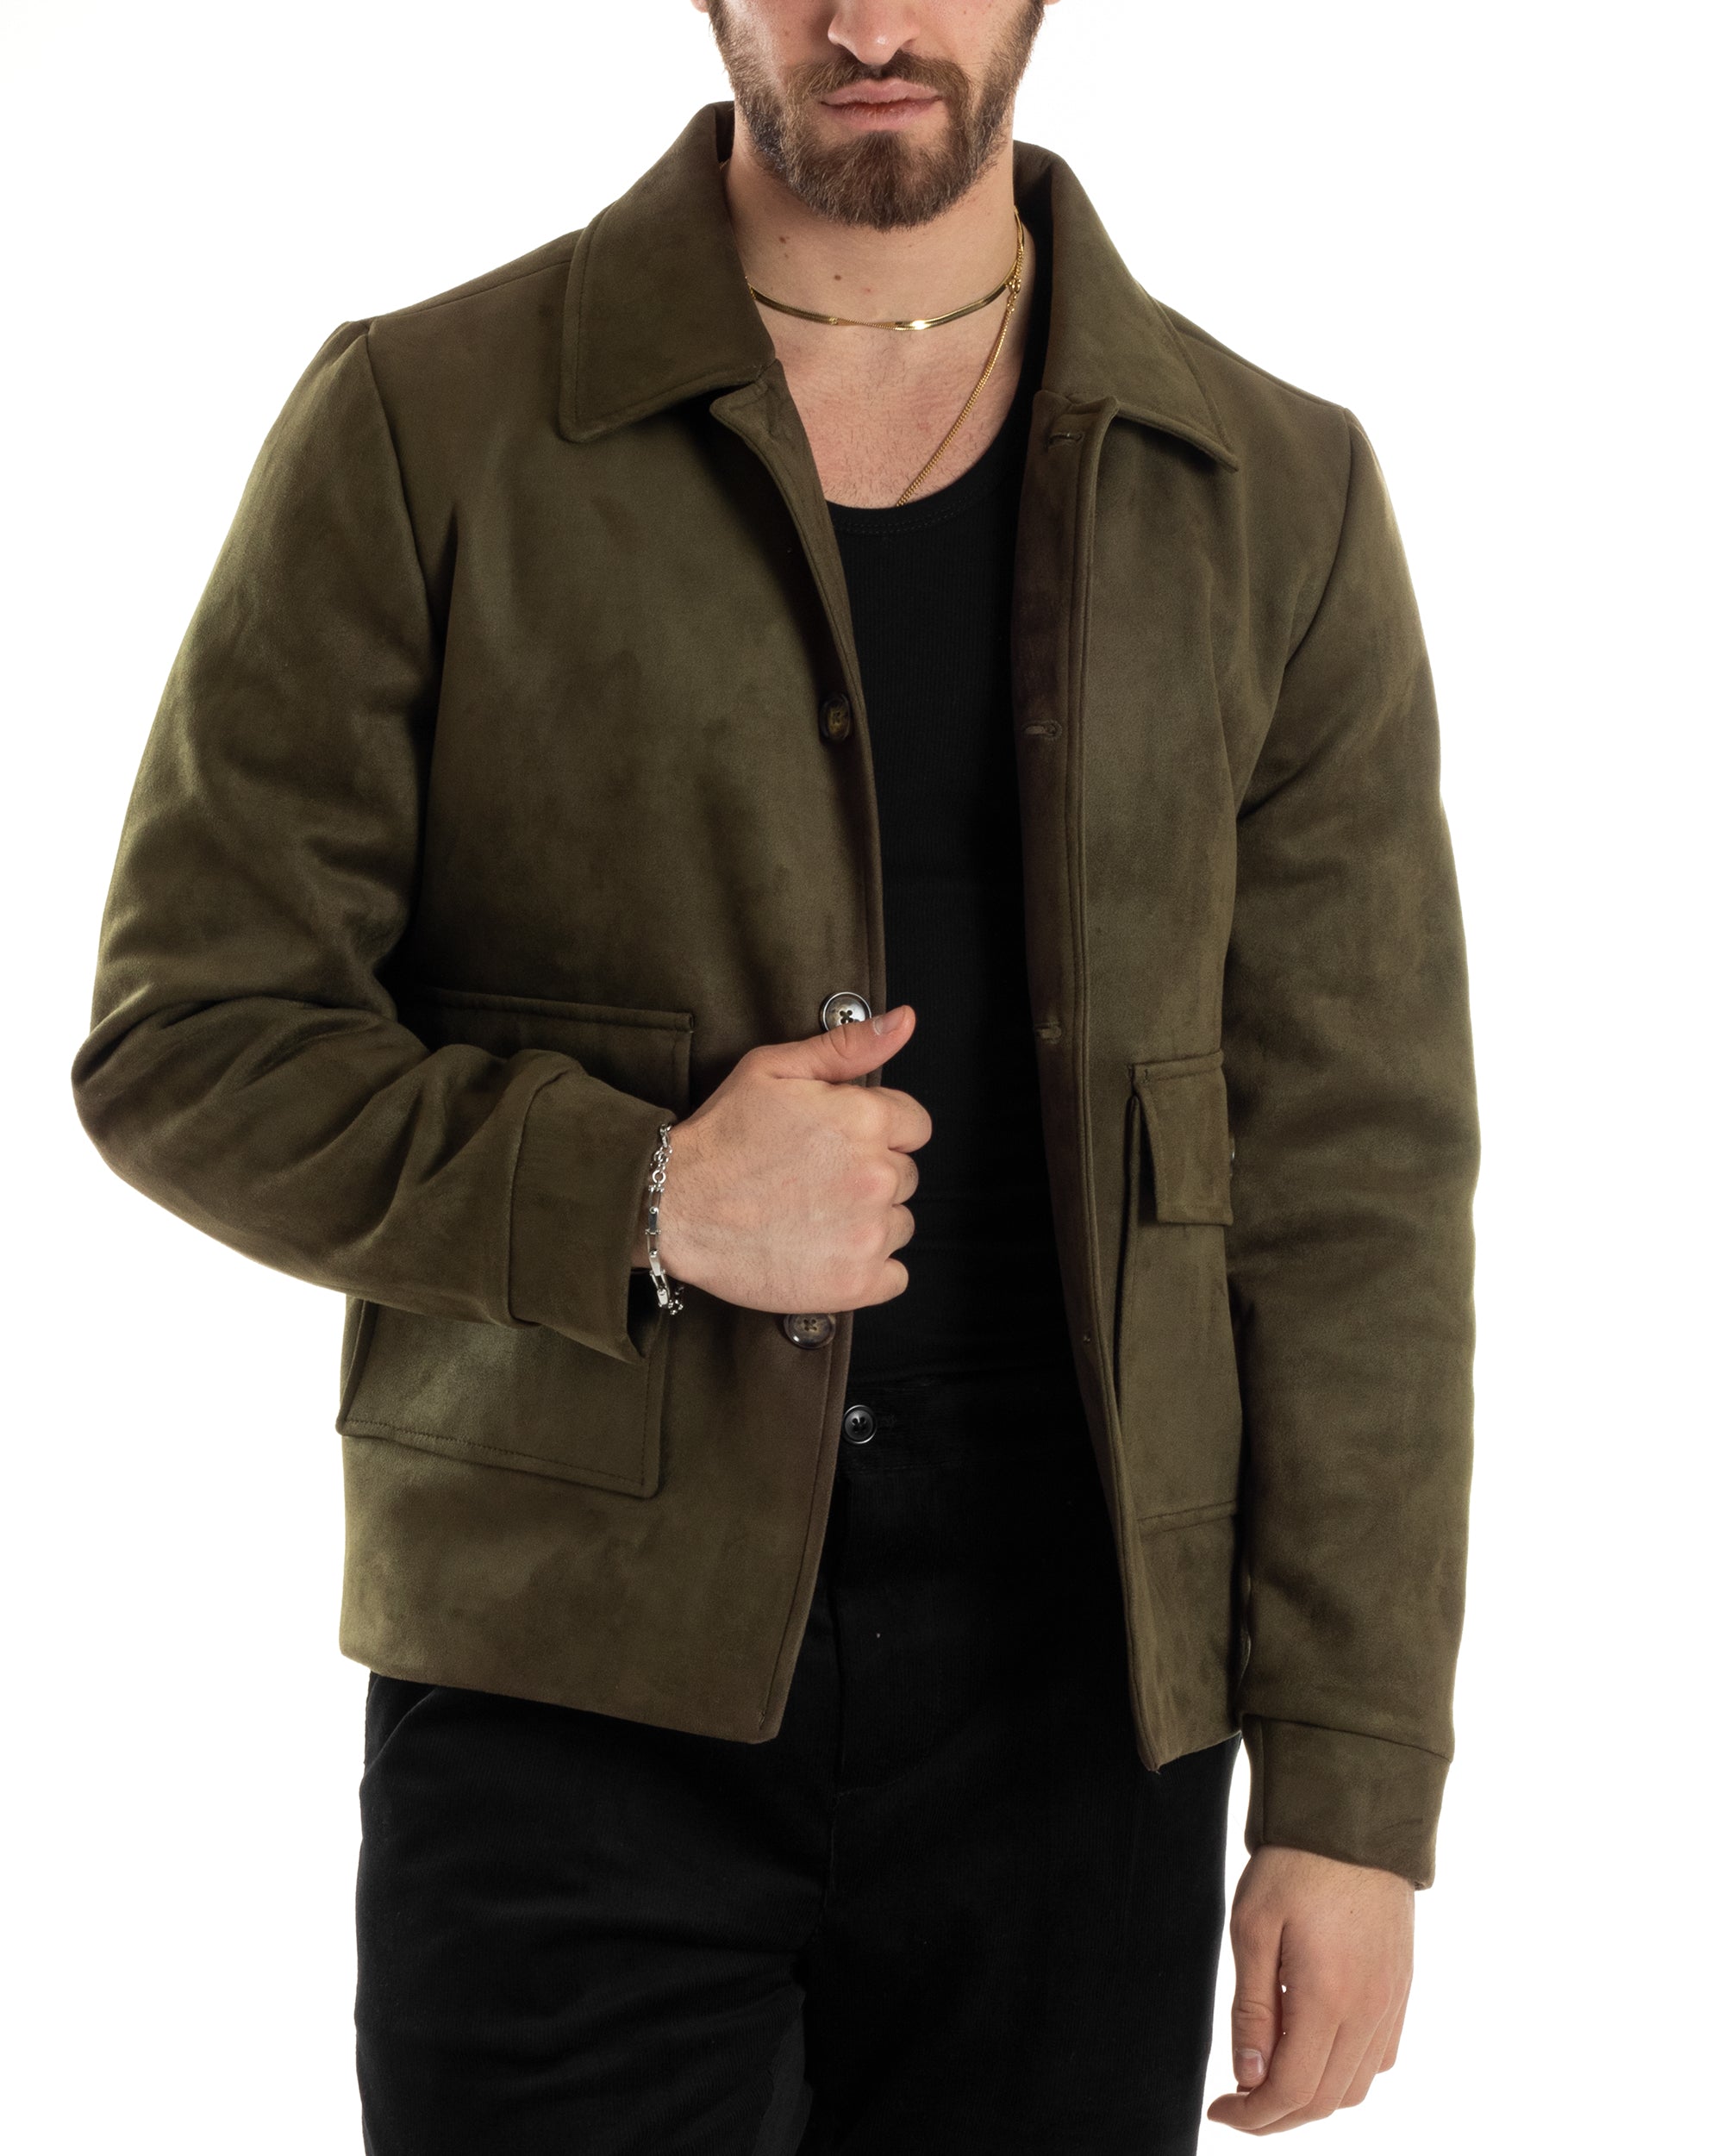 Men's Jacket Suede Bomber Jacket With Buttons Flap Pockets Beige Casual GIOSAL-G3088A